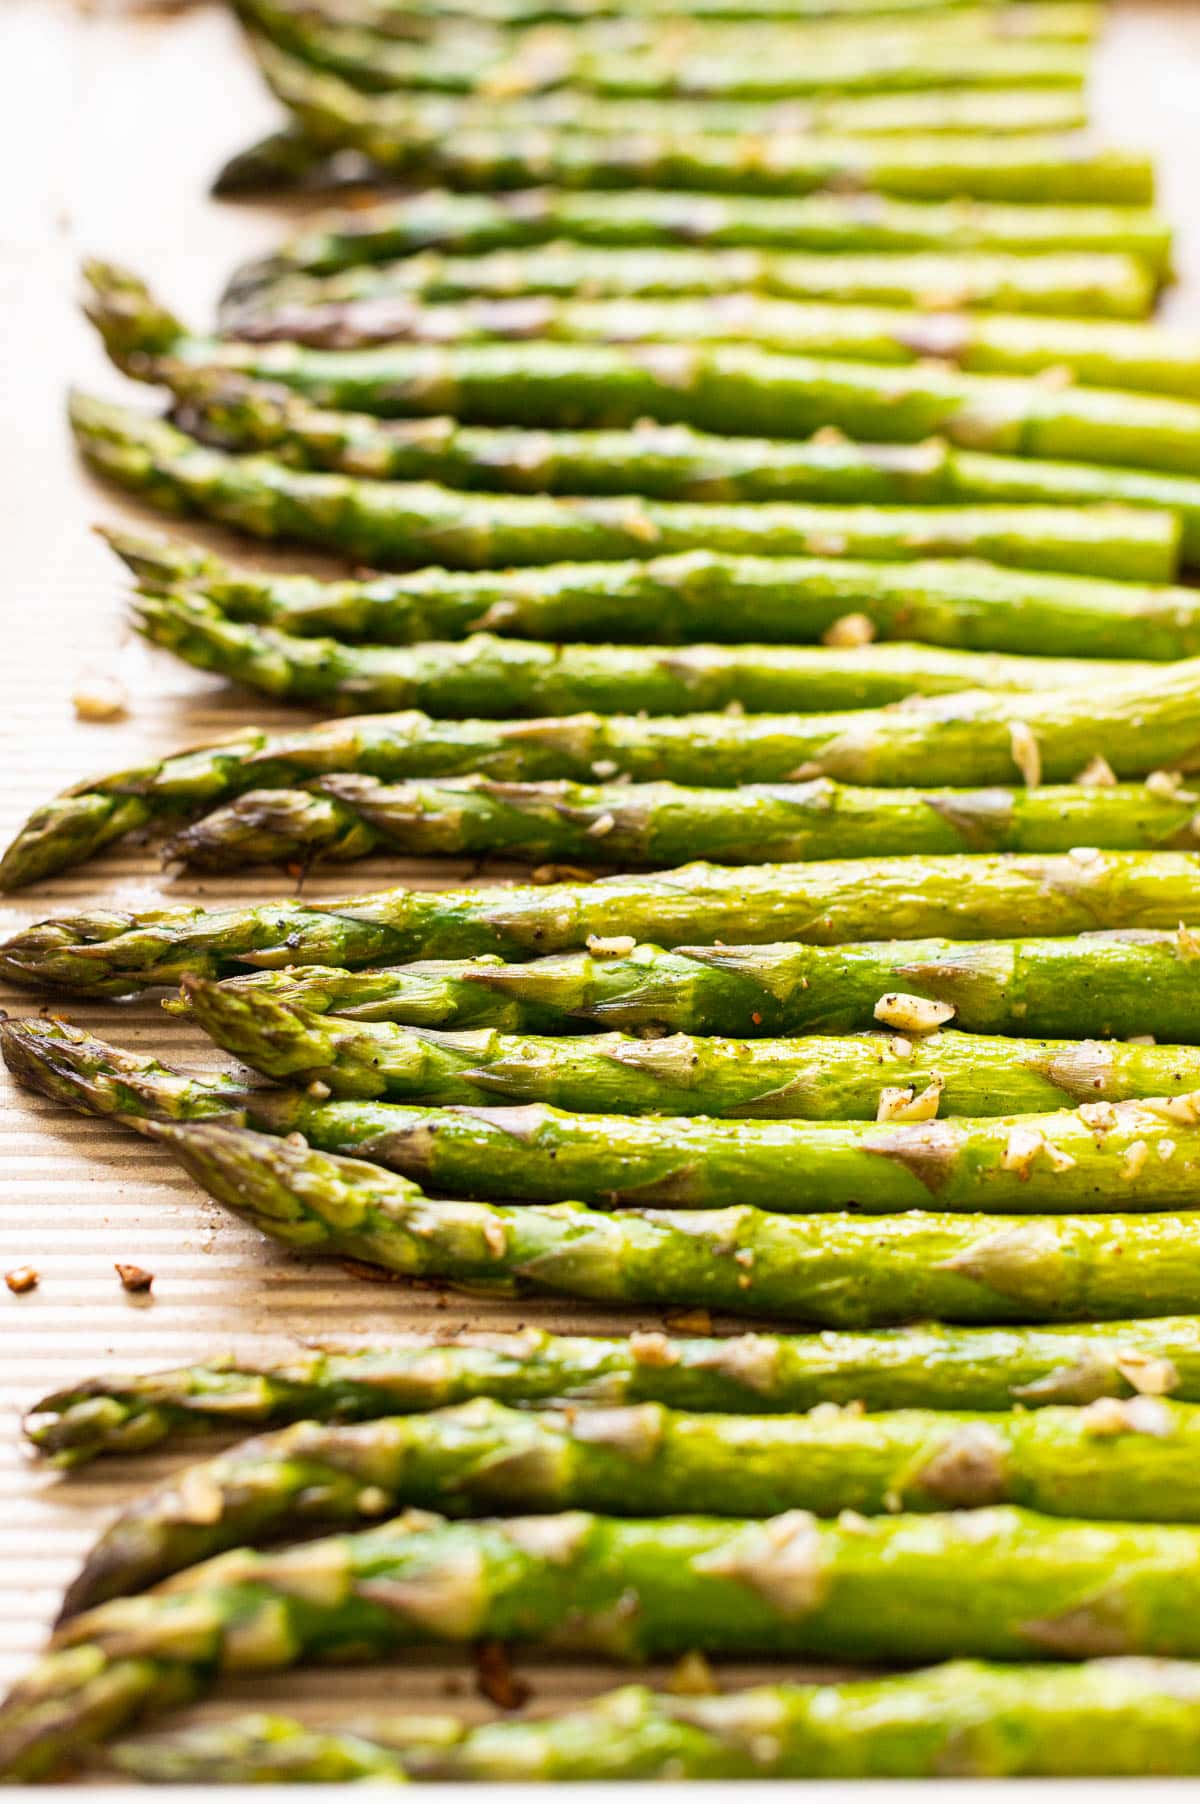 Oven baked asparagus with garlic on a baking sheet.